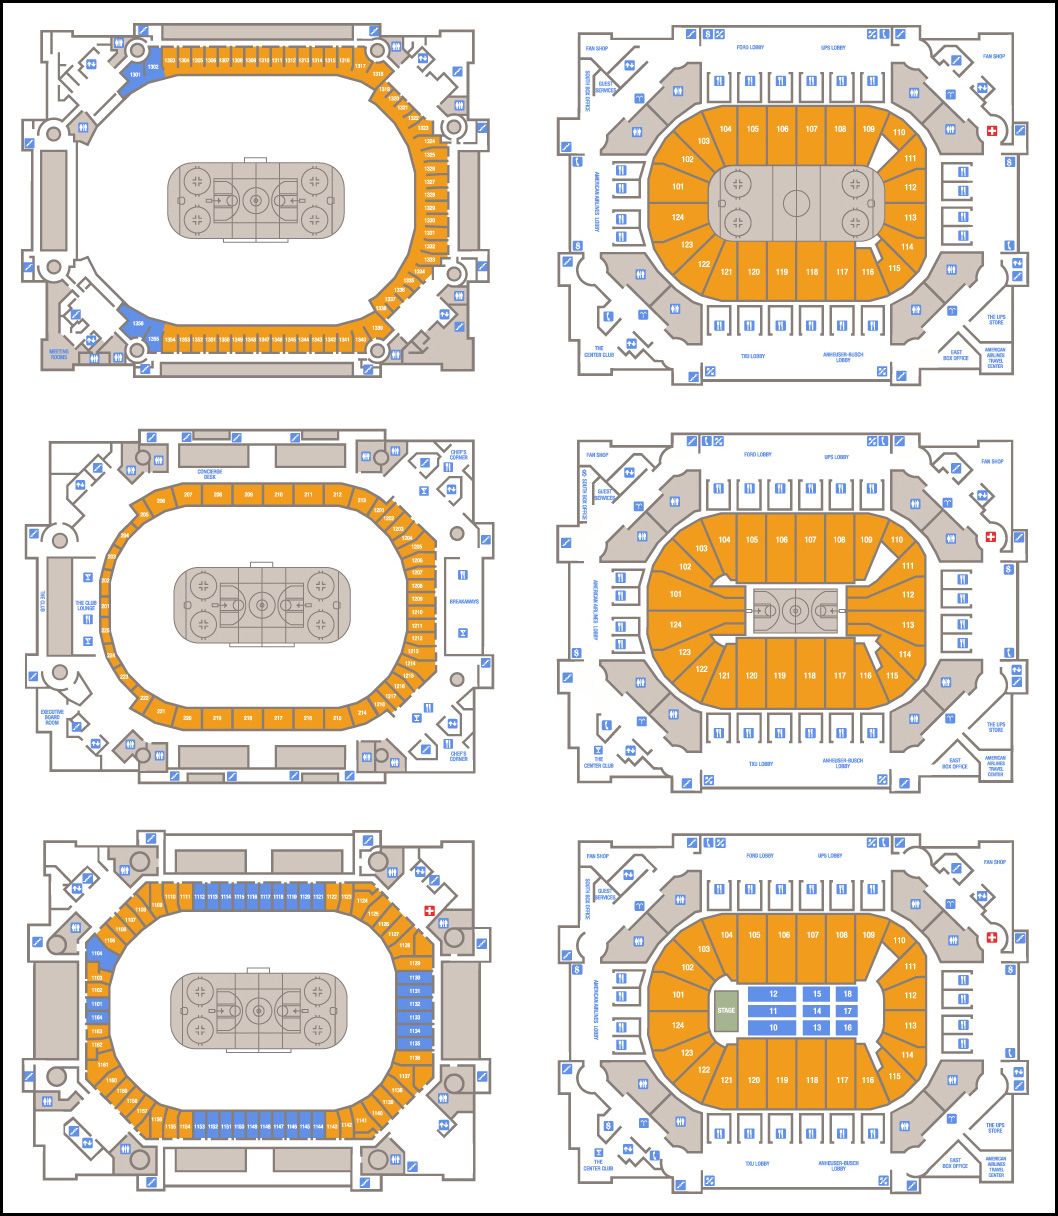 Floorplan and seating plan for American Airlines Center in